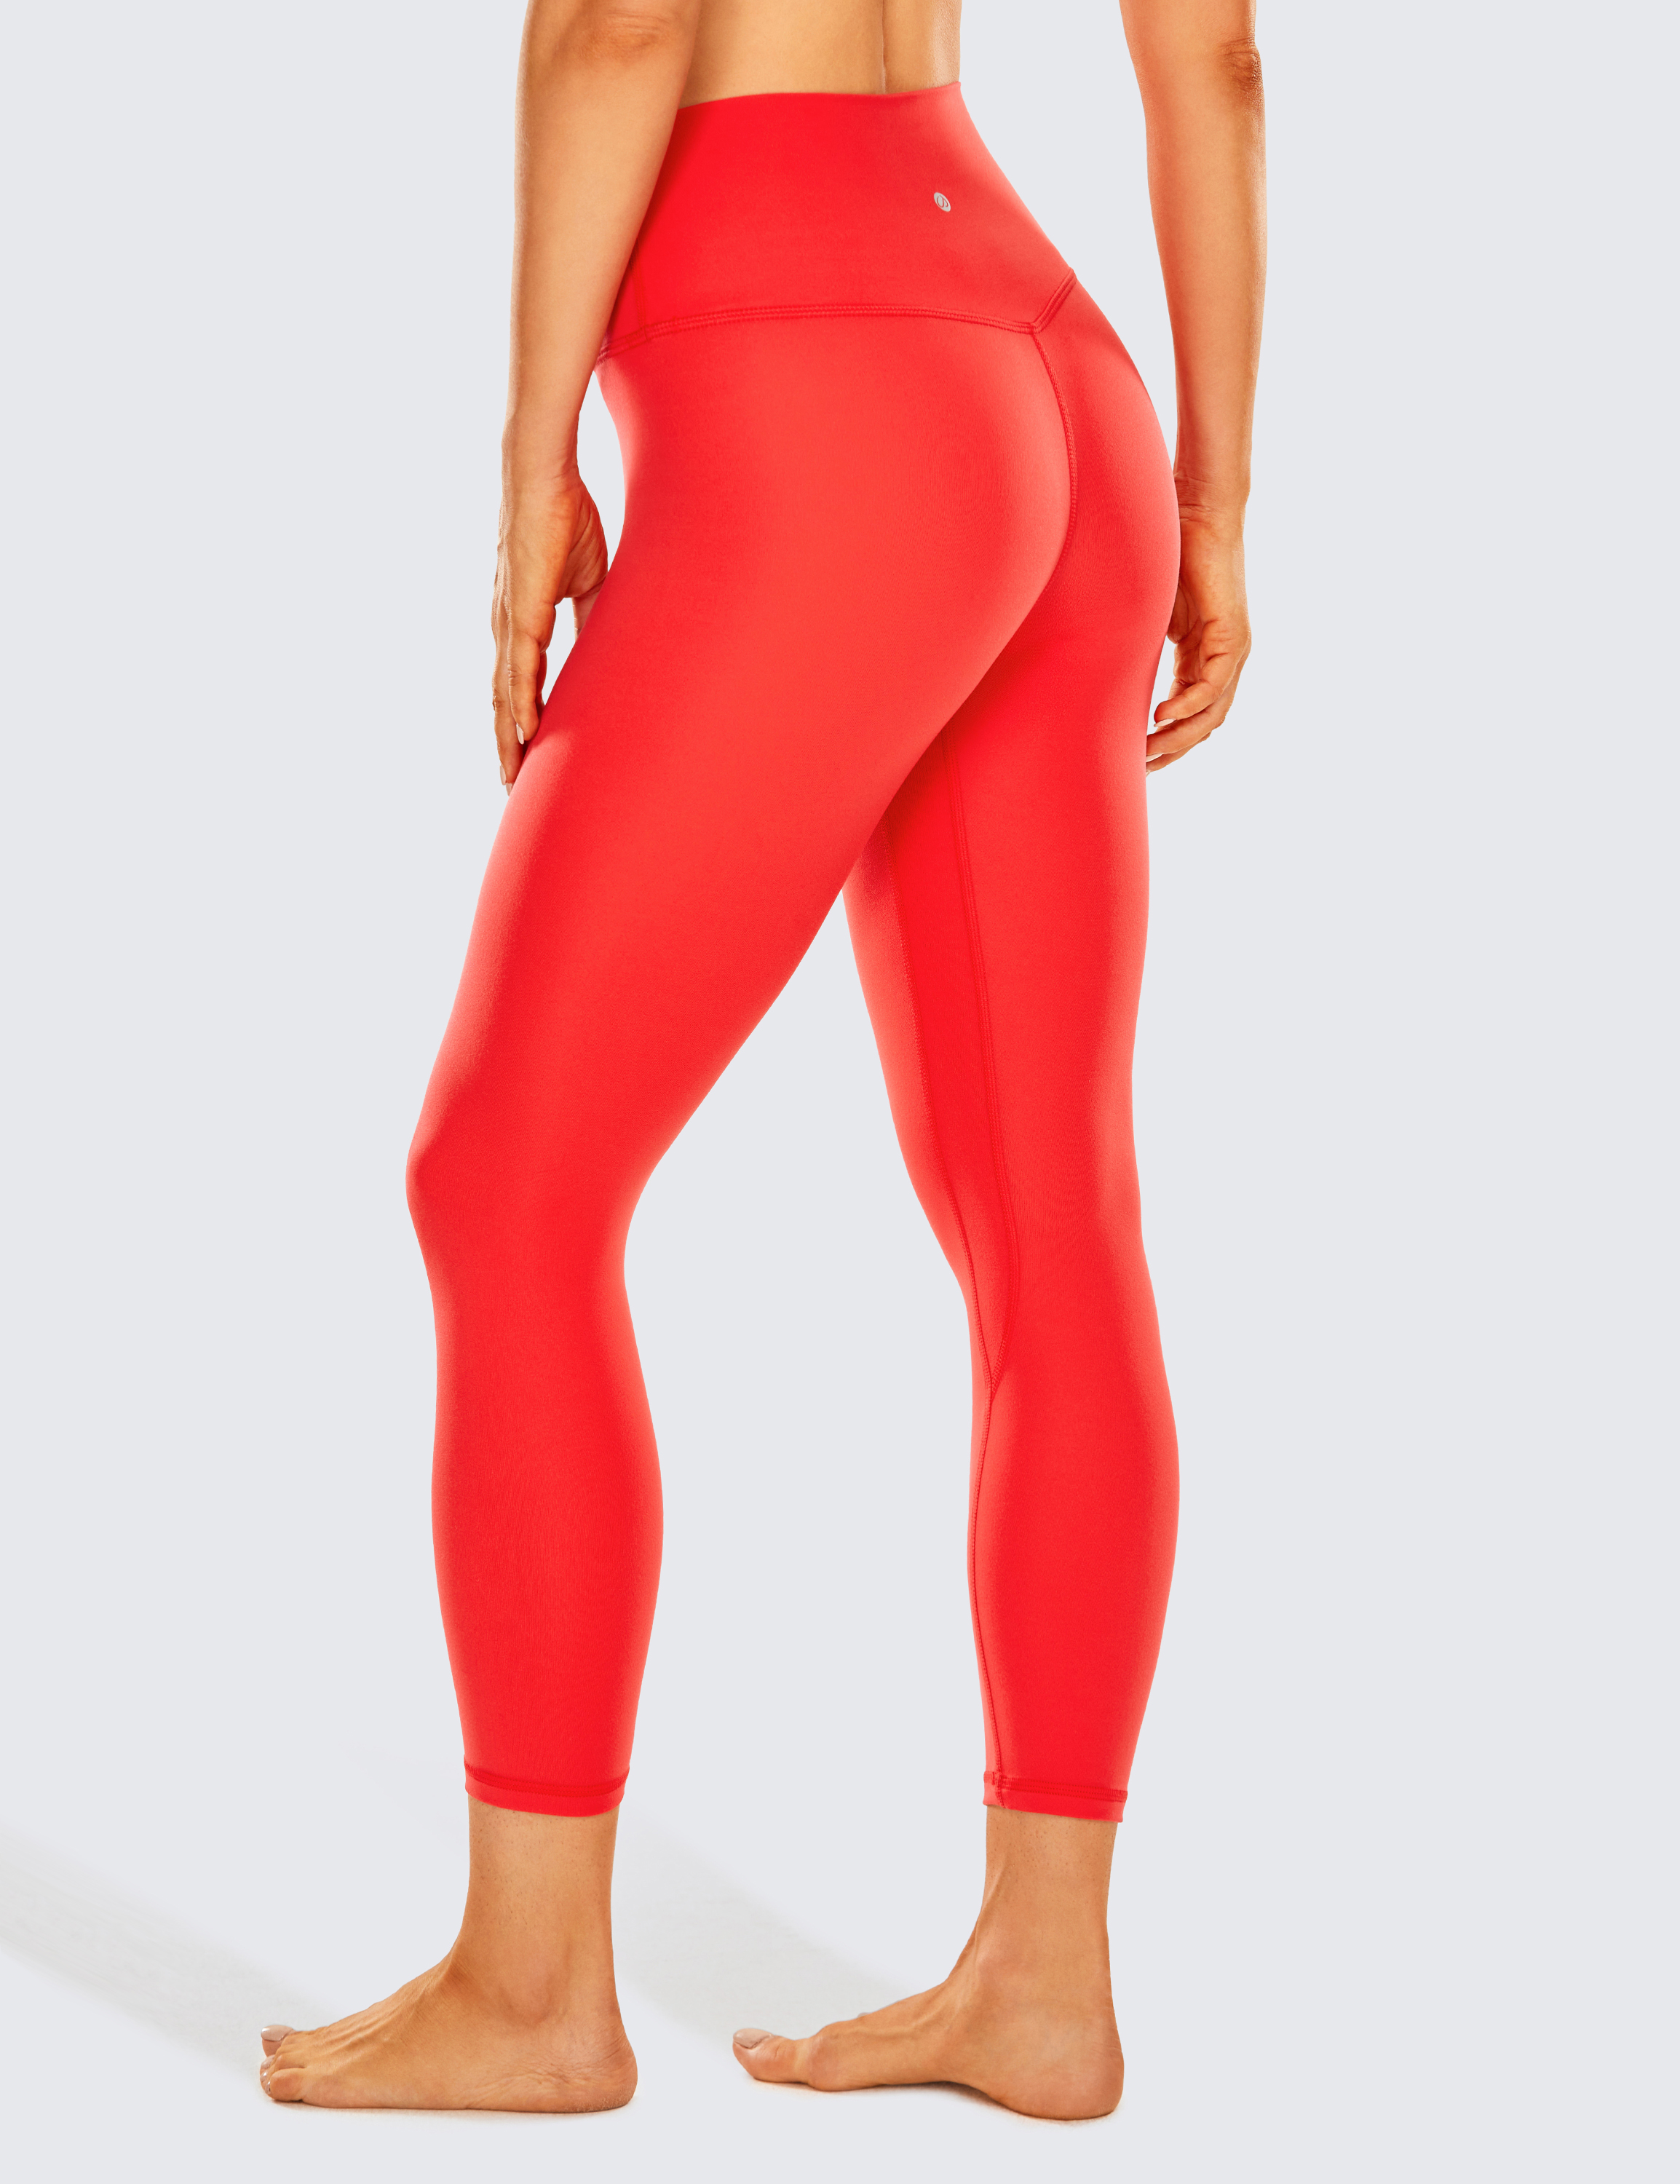 NWT 2020 Womens Naked Feel Fabric Skirted Leggings With Back Waist, Two  Piece Pockets, And Butter Soft Fabric For Active Sport And Jogging LJ200814  From Luo02, $27.06